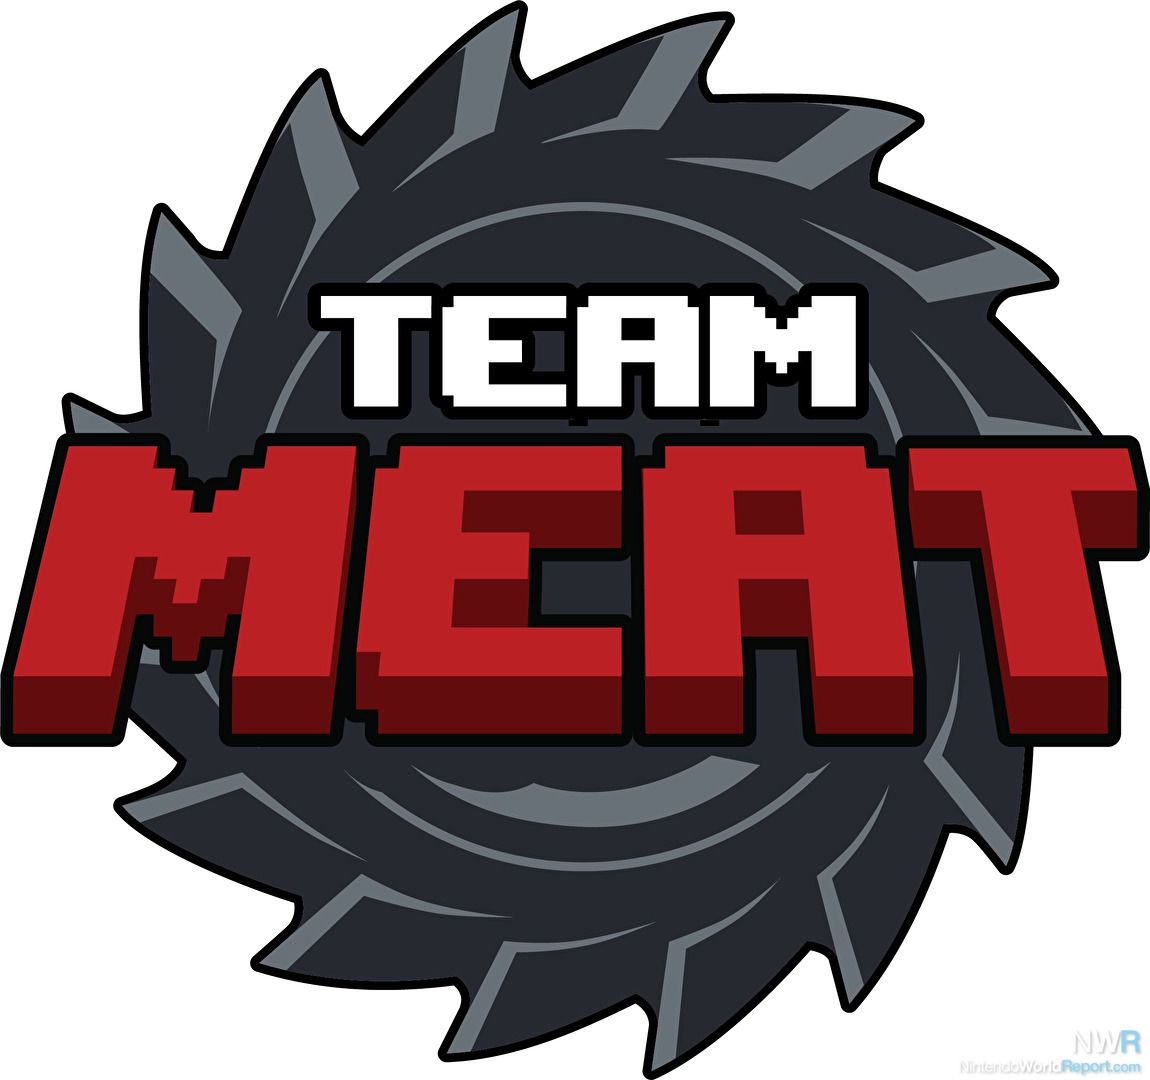 Meat gaming